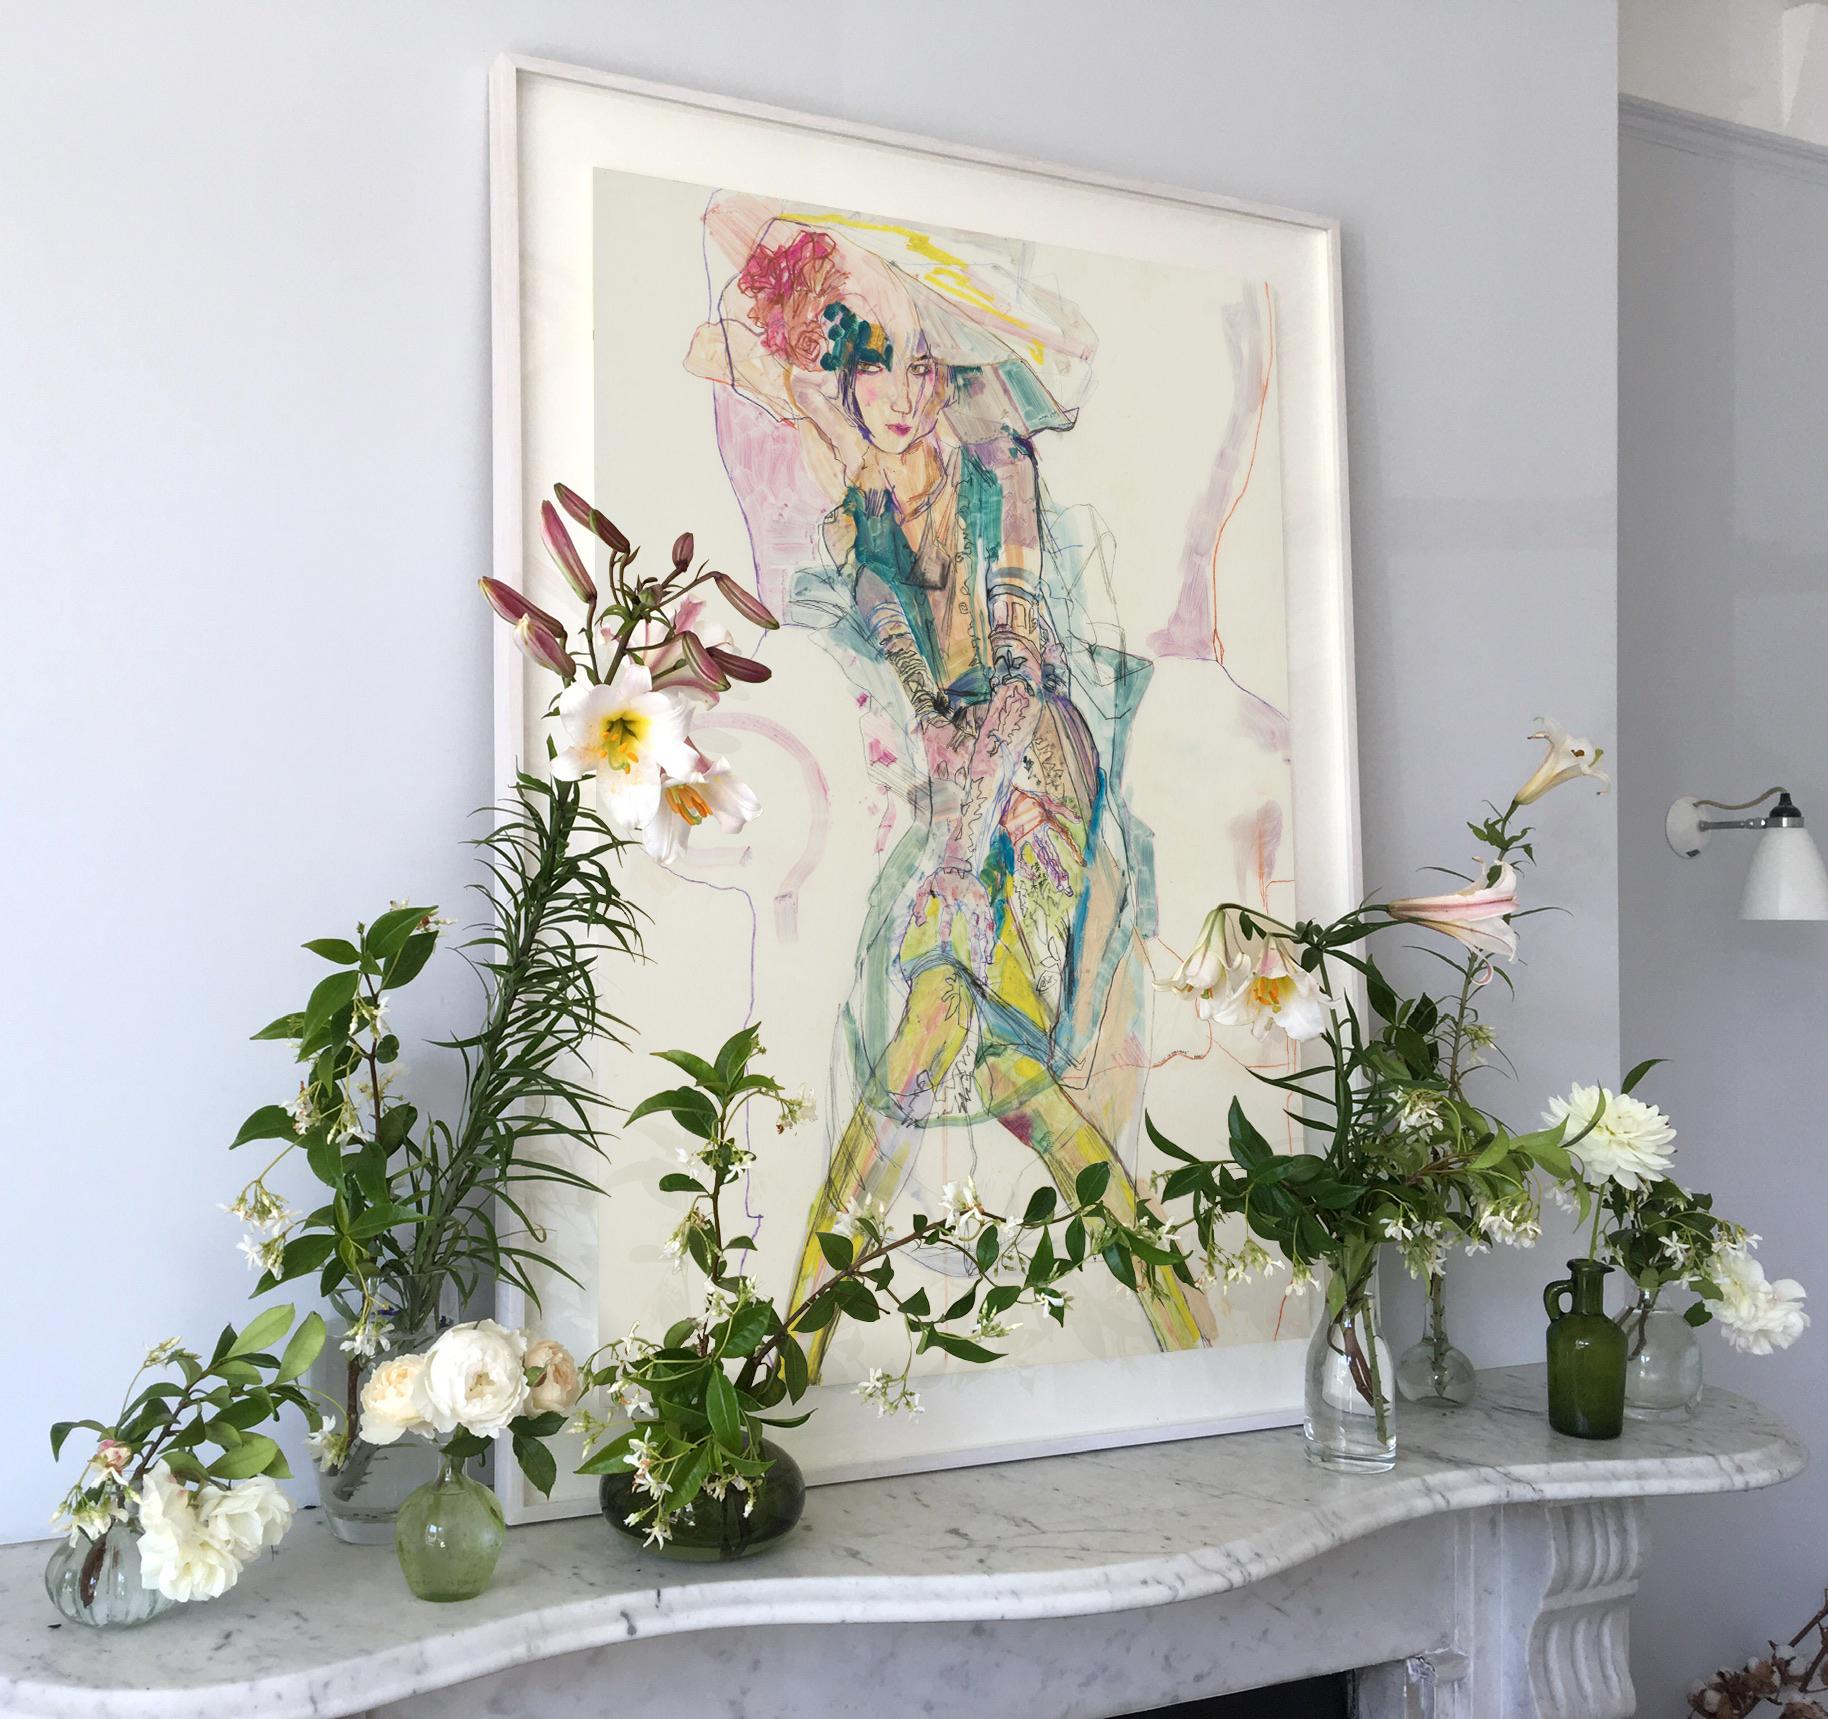 Elodie (Green, Galliano Couture, Paris), Mixed media on Pergamenata parchment - Contemporary Painting by Howard Tangye